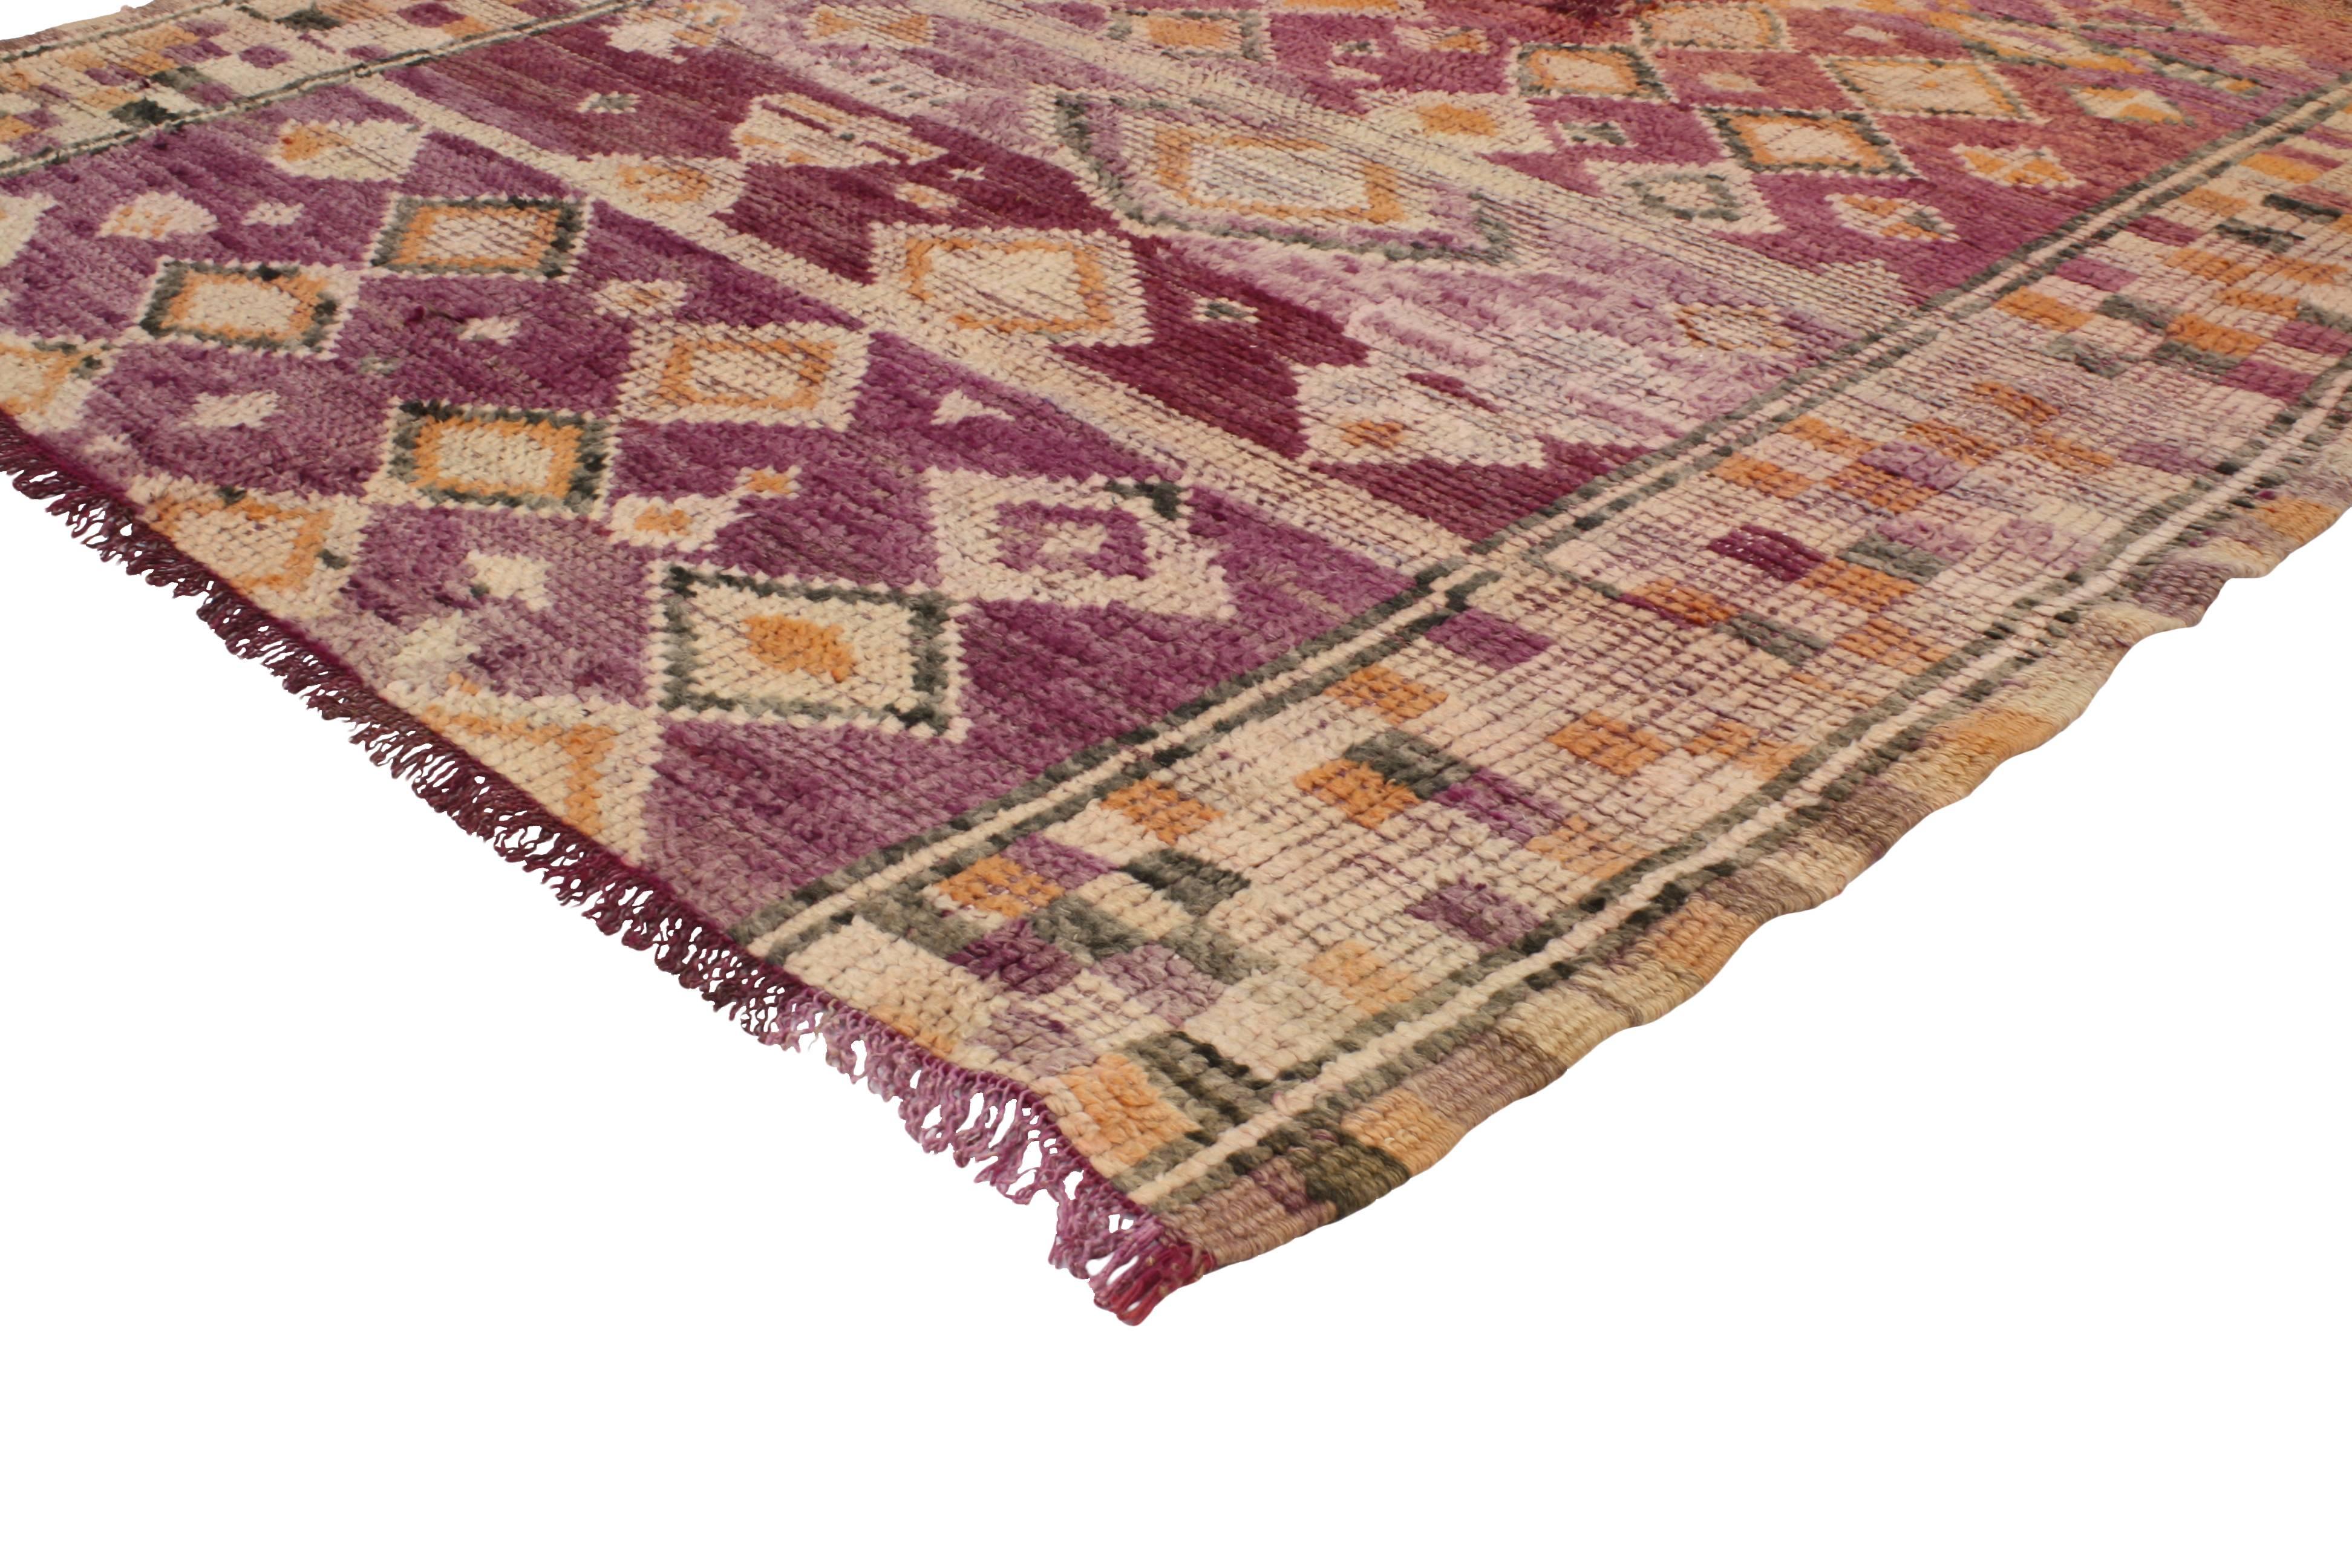 Bursting of Indian summer colors from raspberry, mulberry, plum and lavender to salmon, pink, blush, apricot and orange, this vintage Berber Moroccan rug is a fantastic way to invite flair and create a bright and enigmatic atmosphere in your home.